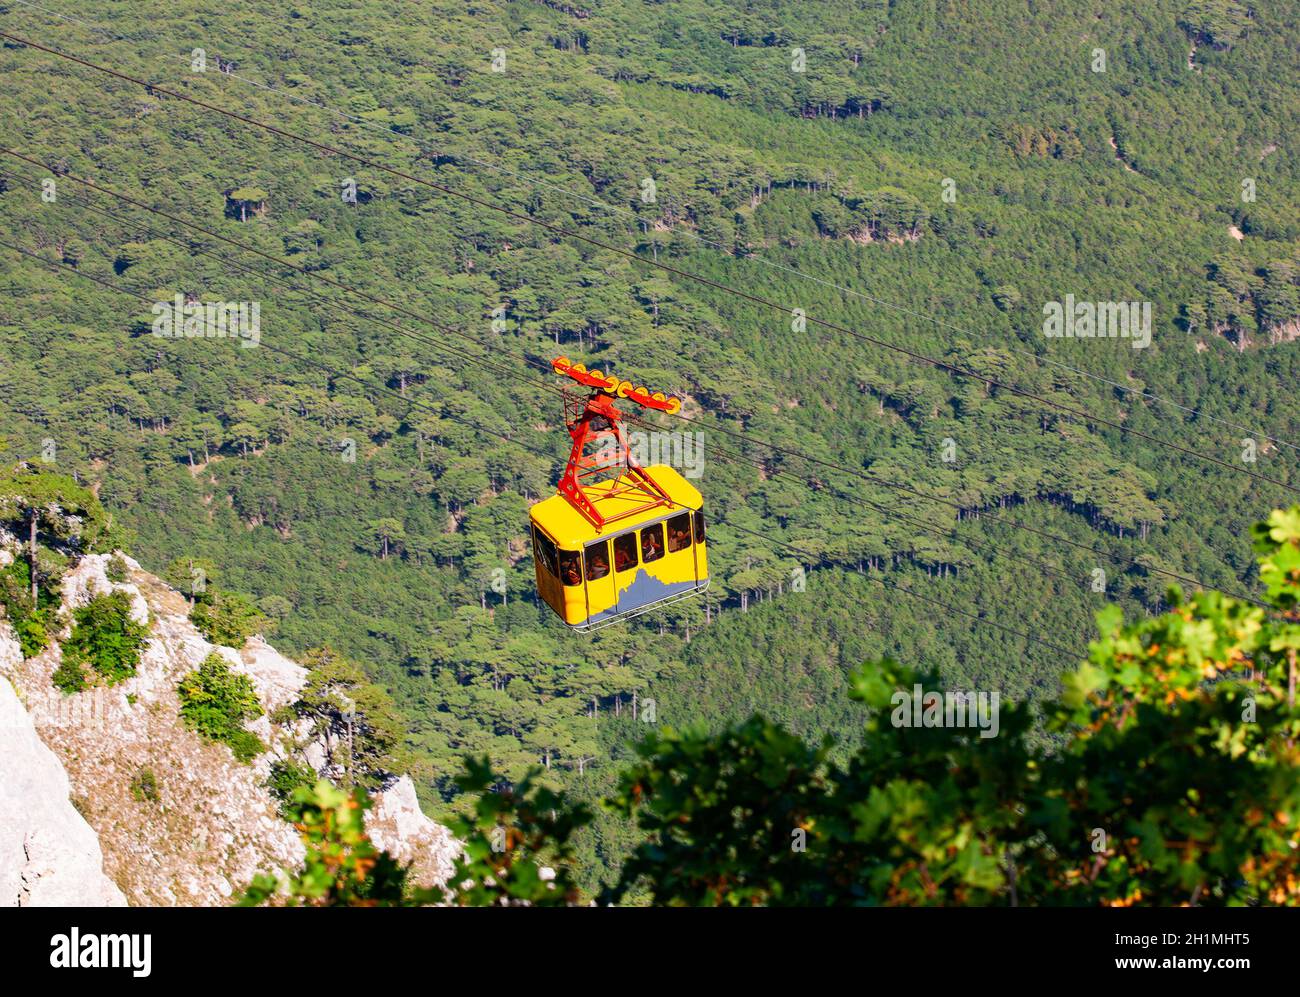 The Cable car high in the mountains Stock Photo